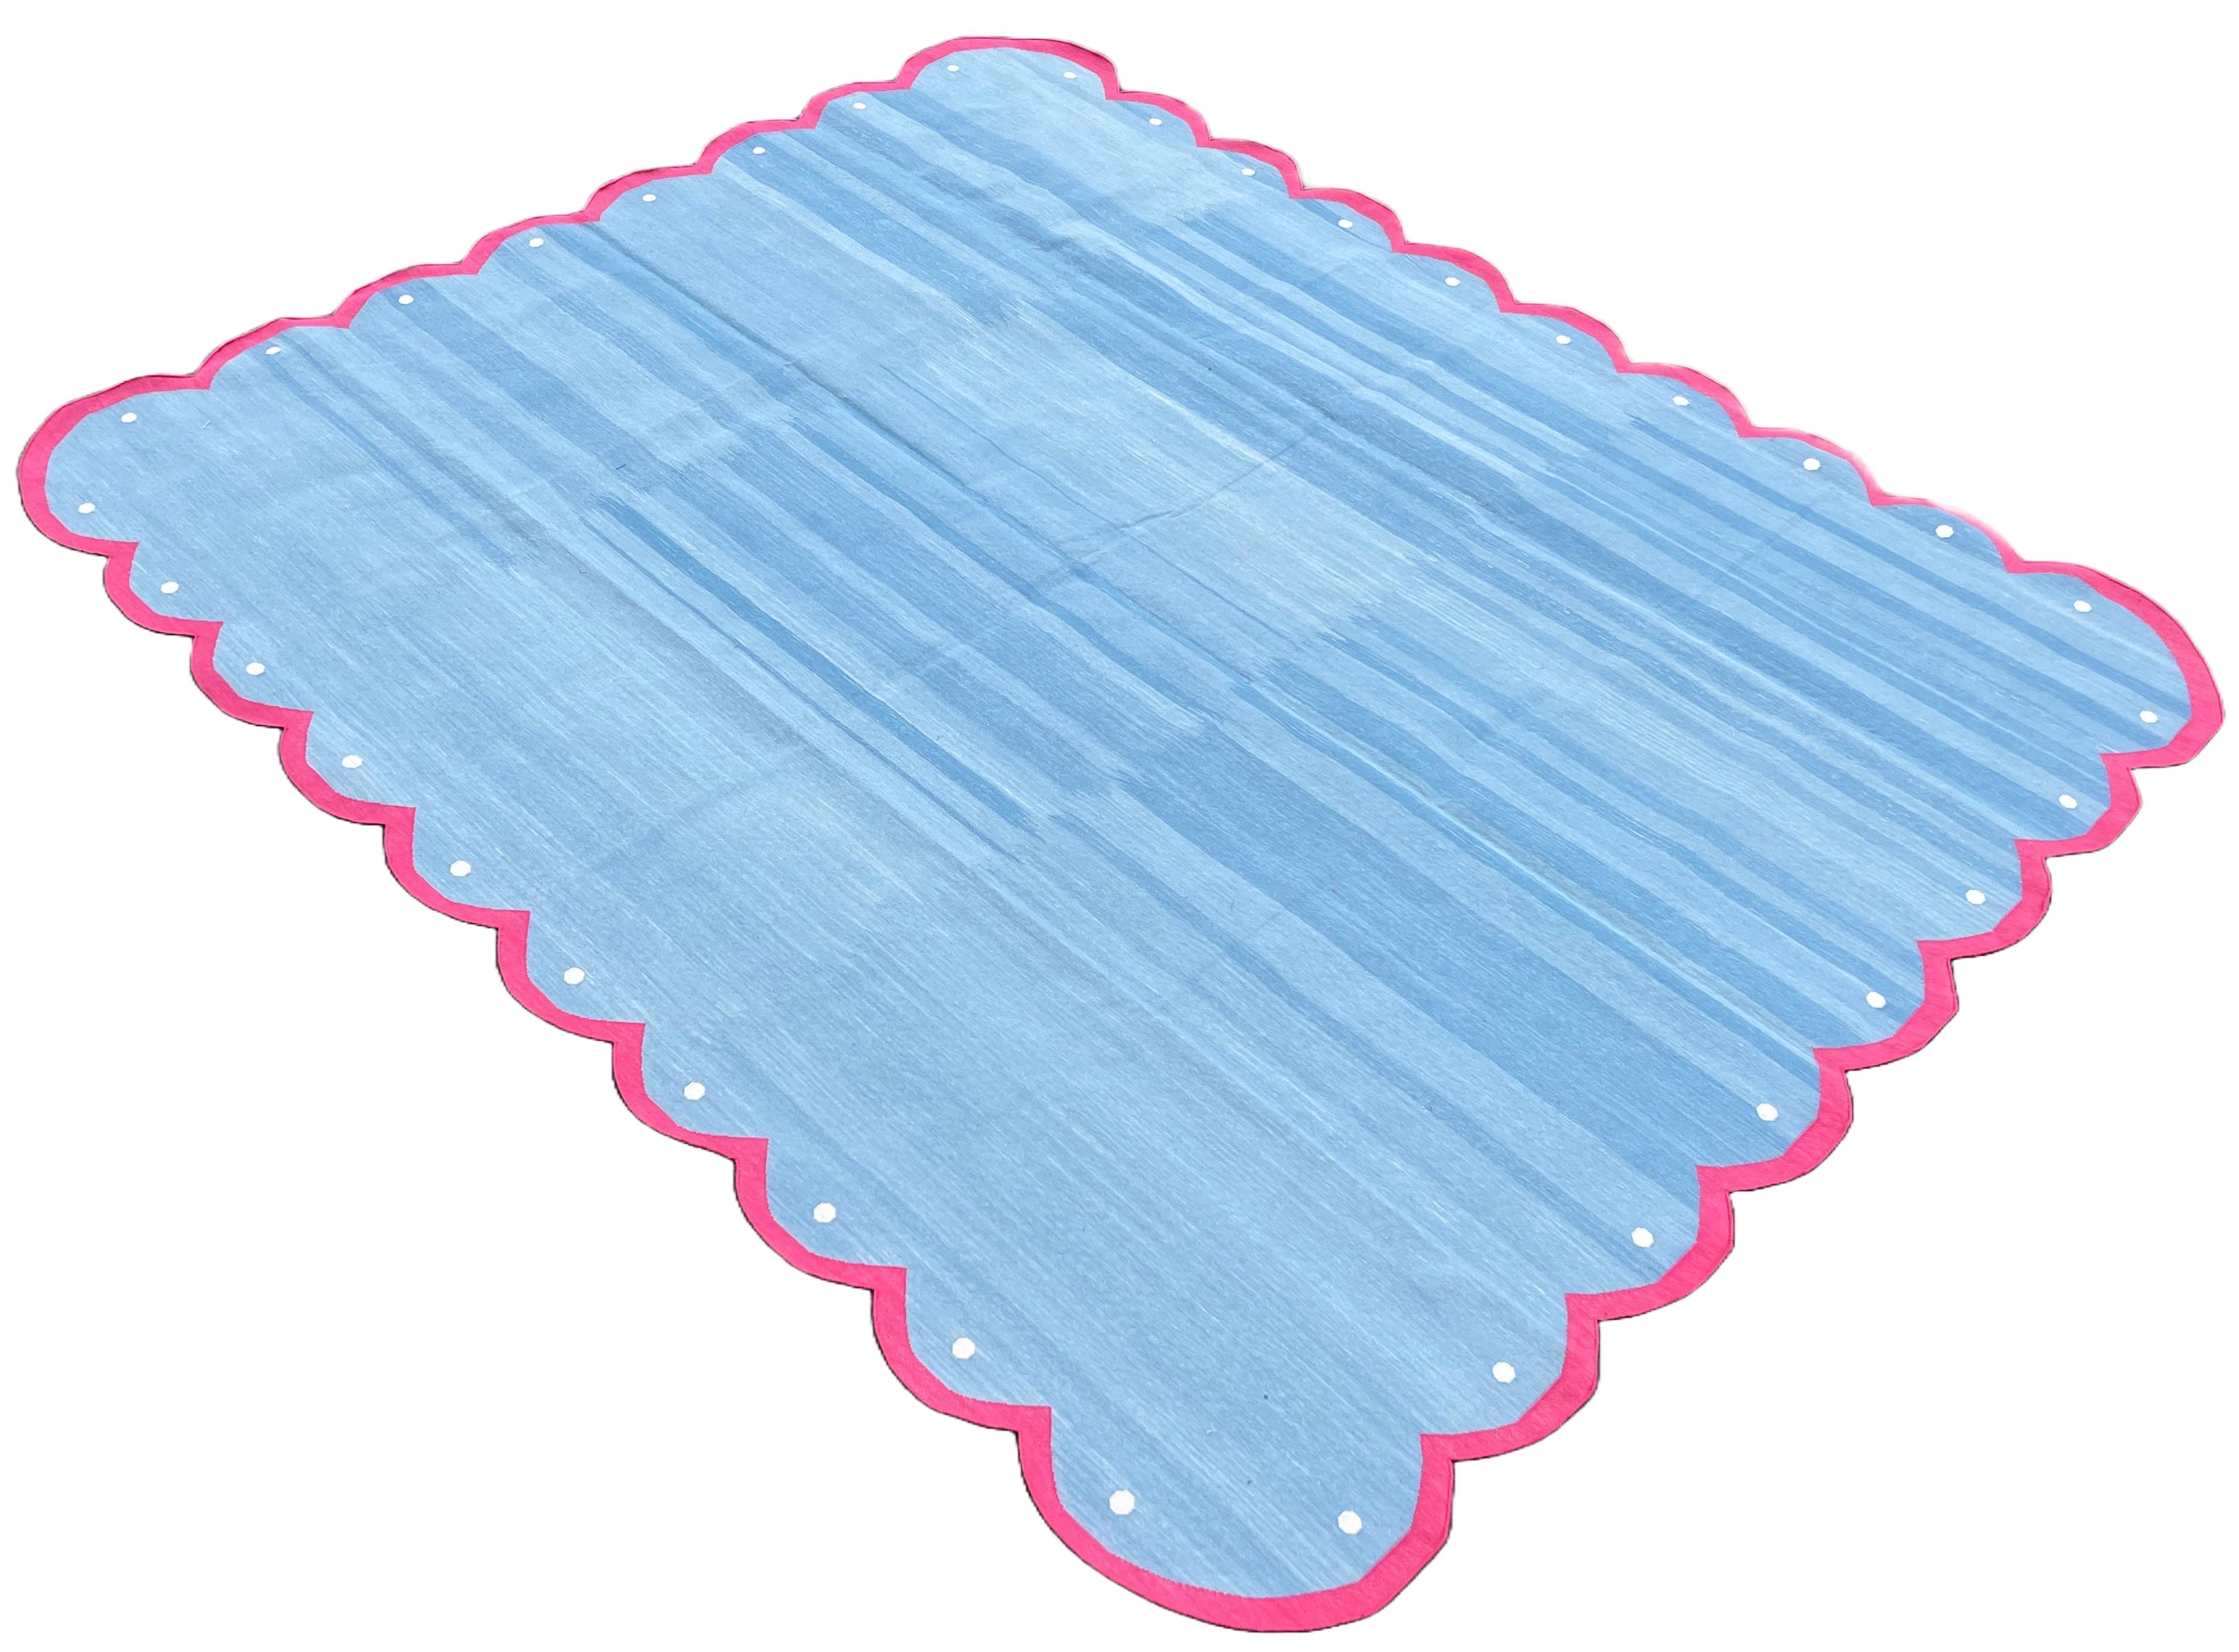 Mid-Century Modern Handmade Cotton Area Flat Weave Rug, 8x10 Blue And Pink Scalloped Indian Dhurrie For Sale